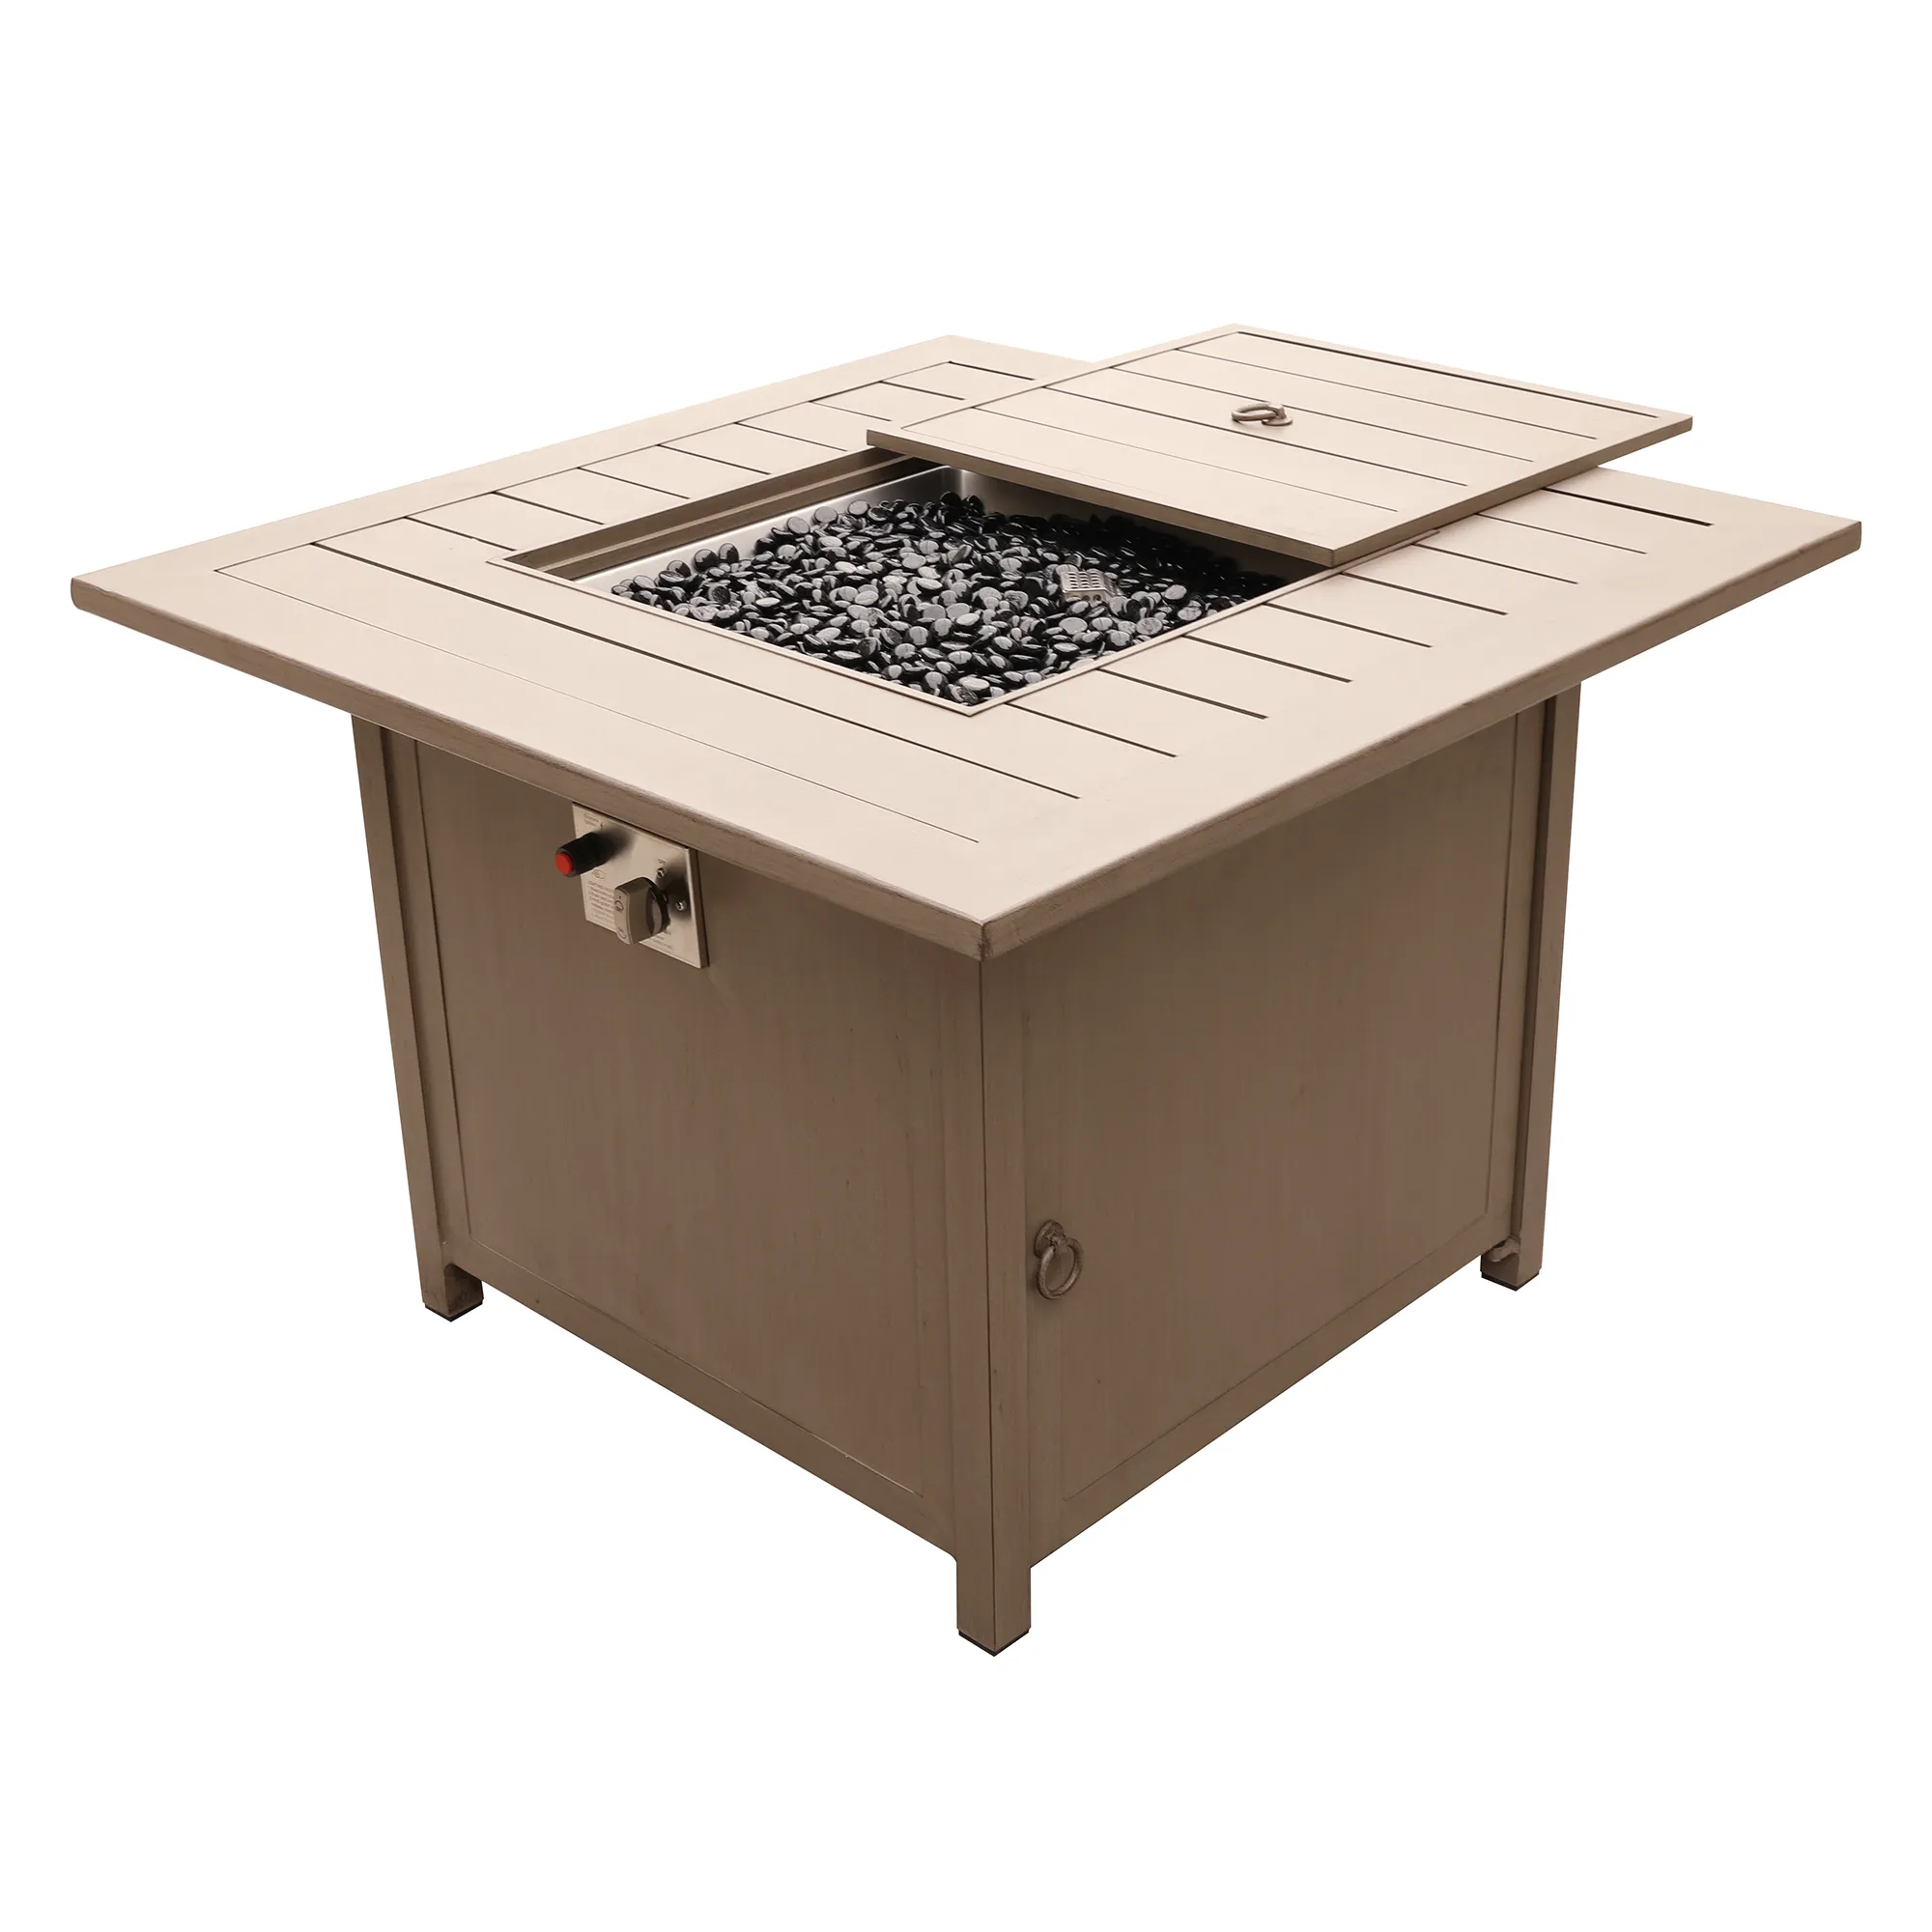 36" Square Gas Firepit Table